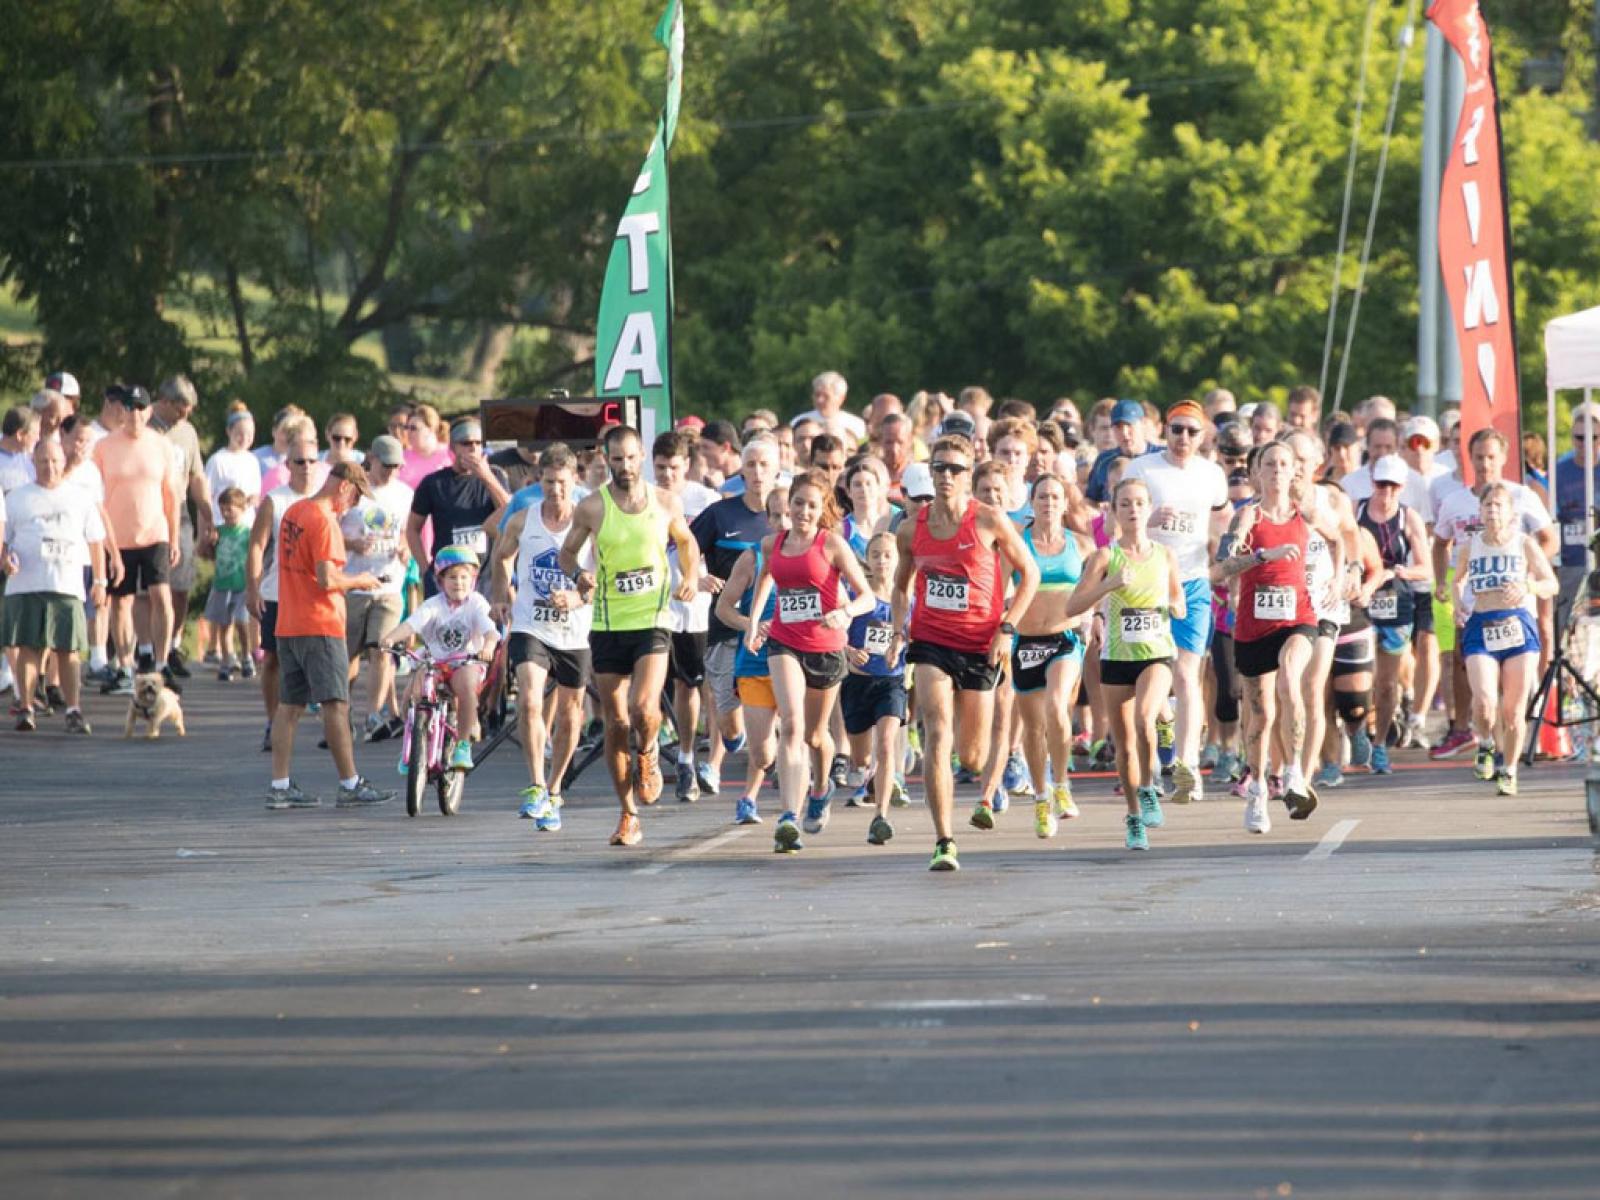 A crowd of runners starting a race